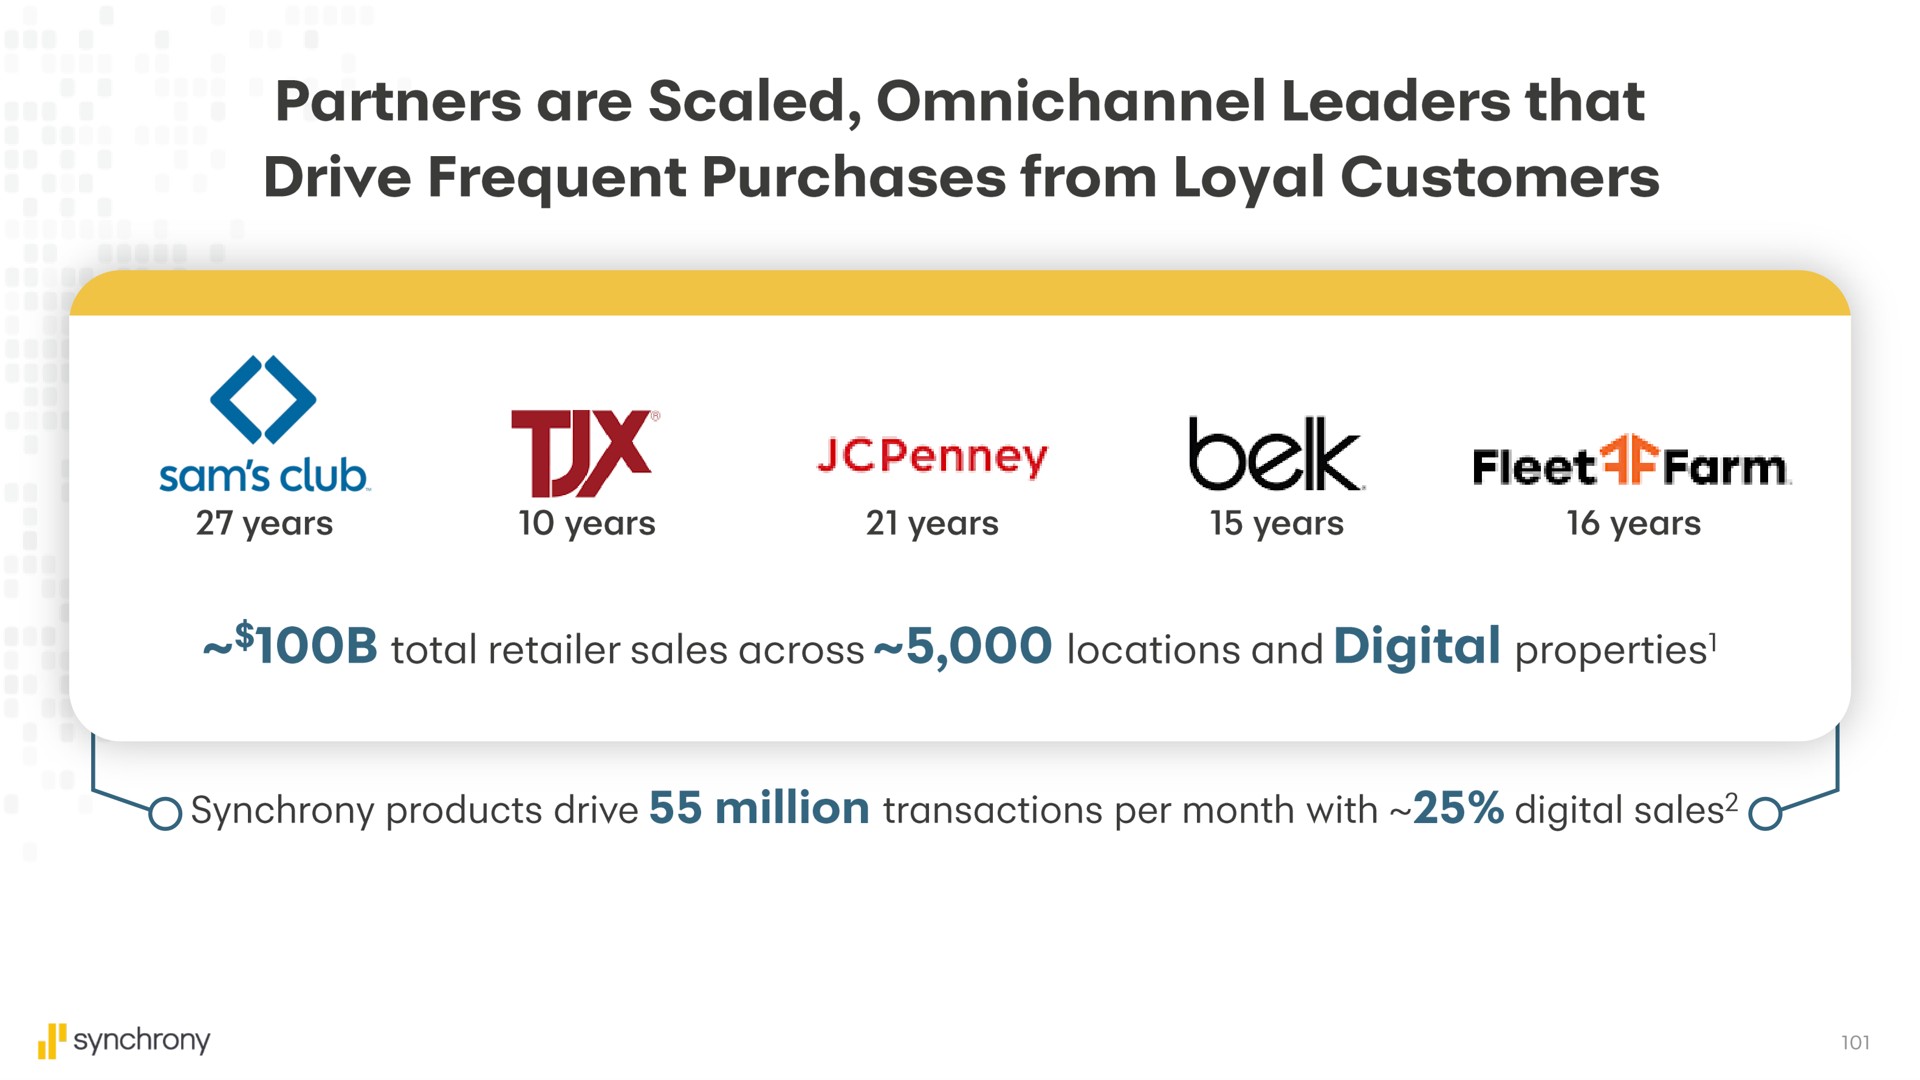 partners are scaled leaders that drive frequent purchases from loyal customers tux fleet farm | Synchrony Financial